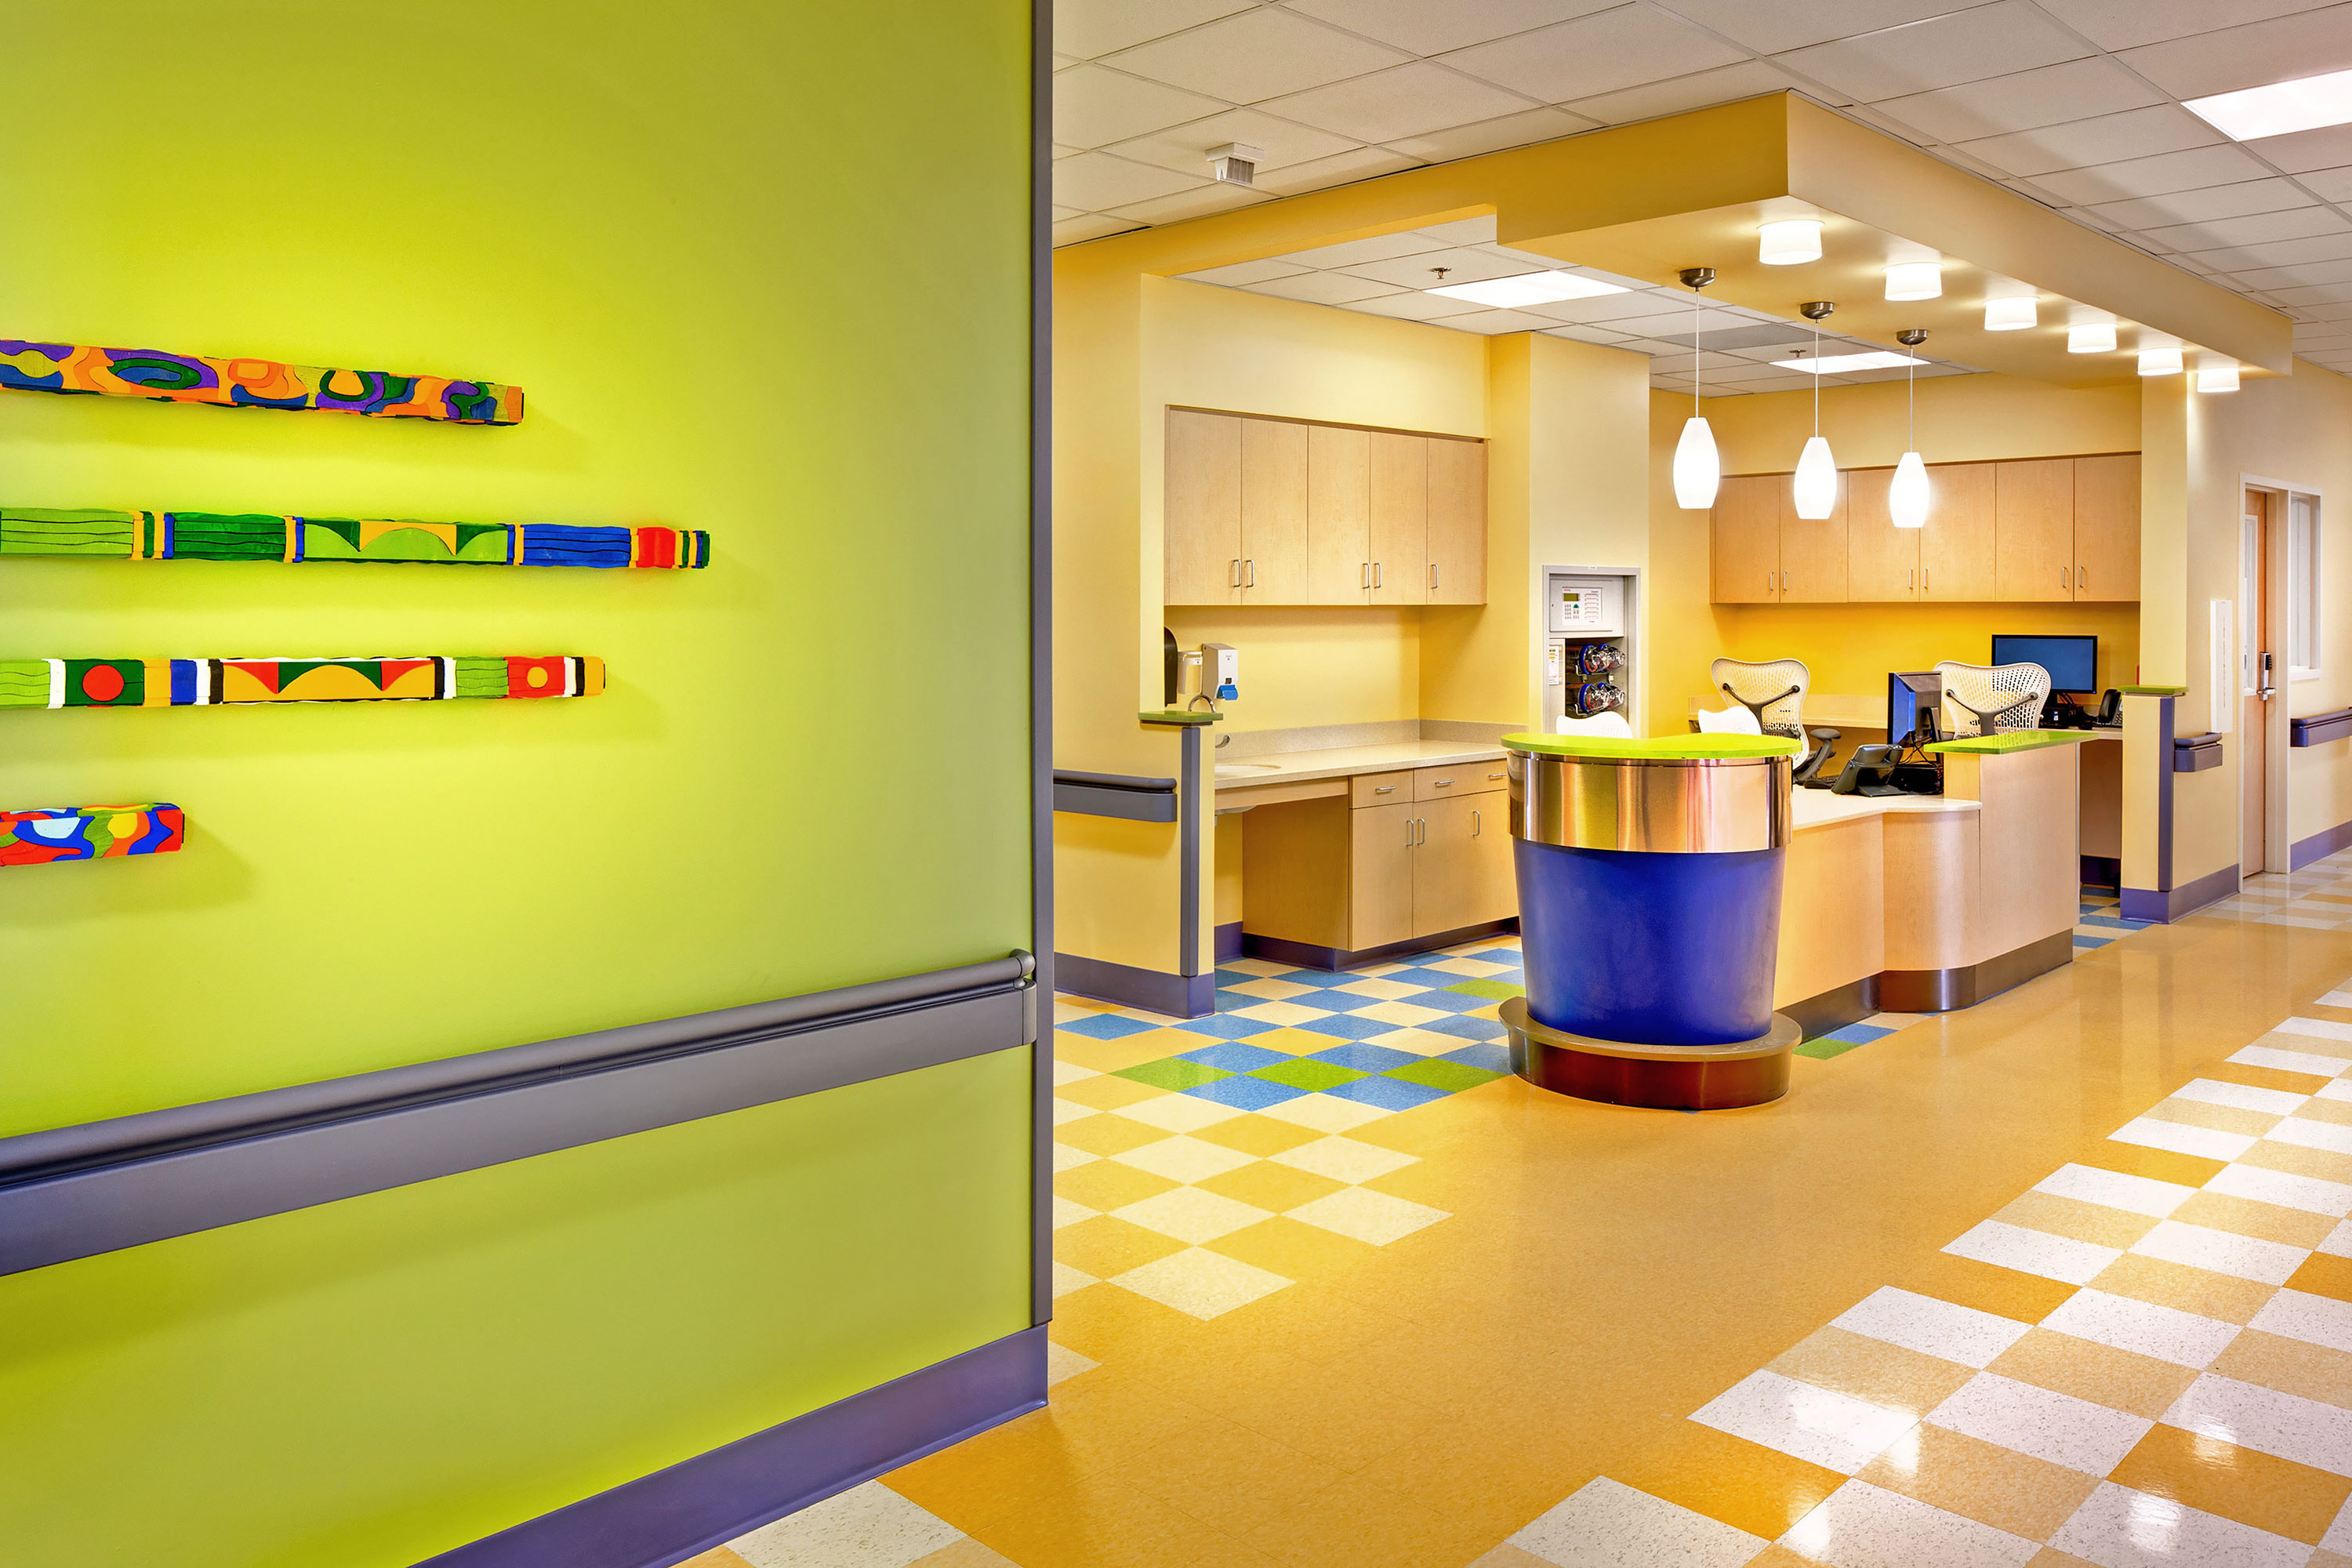 Children's Hospital - El Paso, Texas. Architecture Photography by Alan Blakely. 